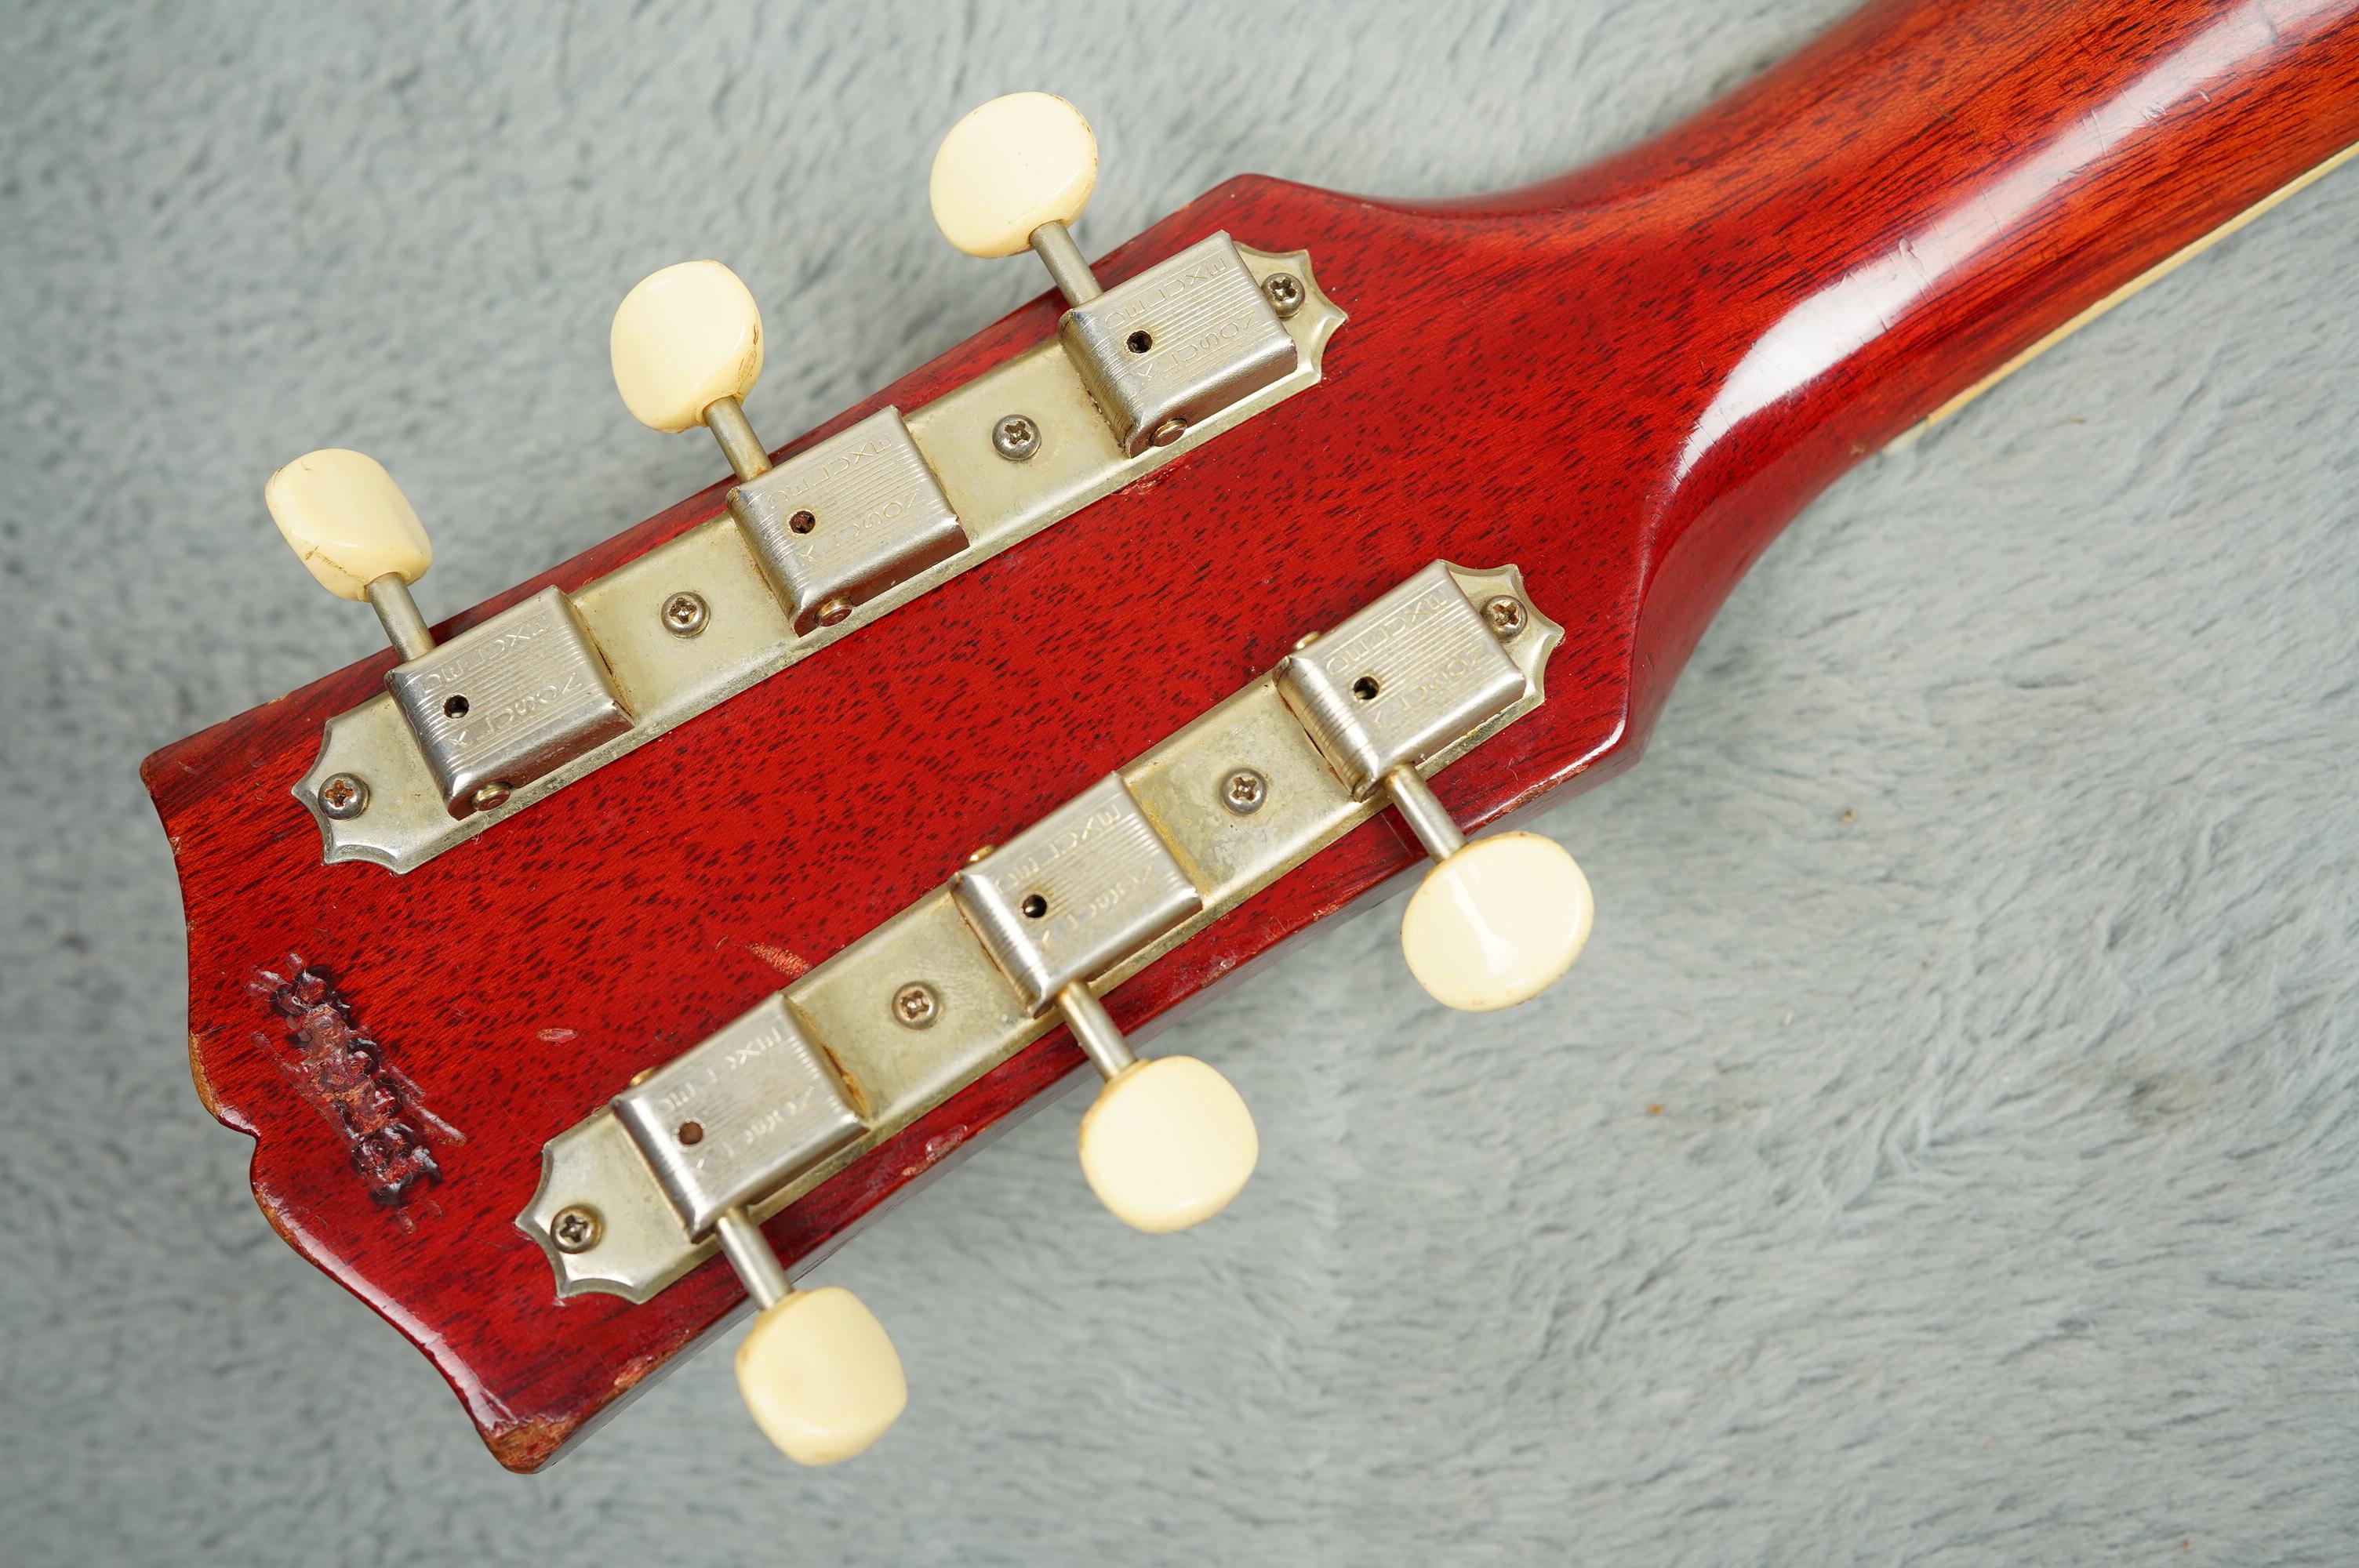 1964 Gibson SG Special wrap tail